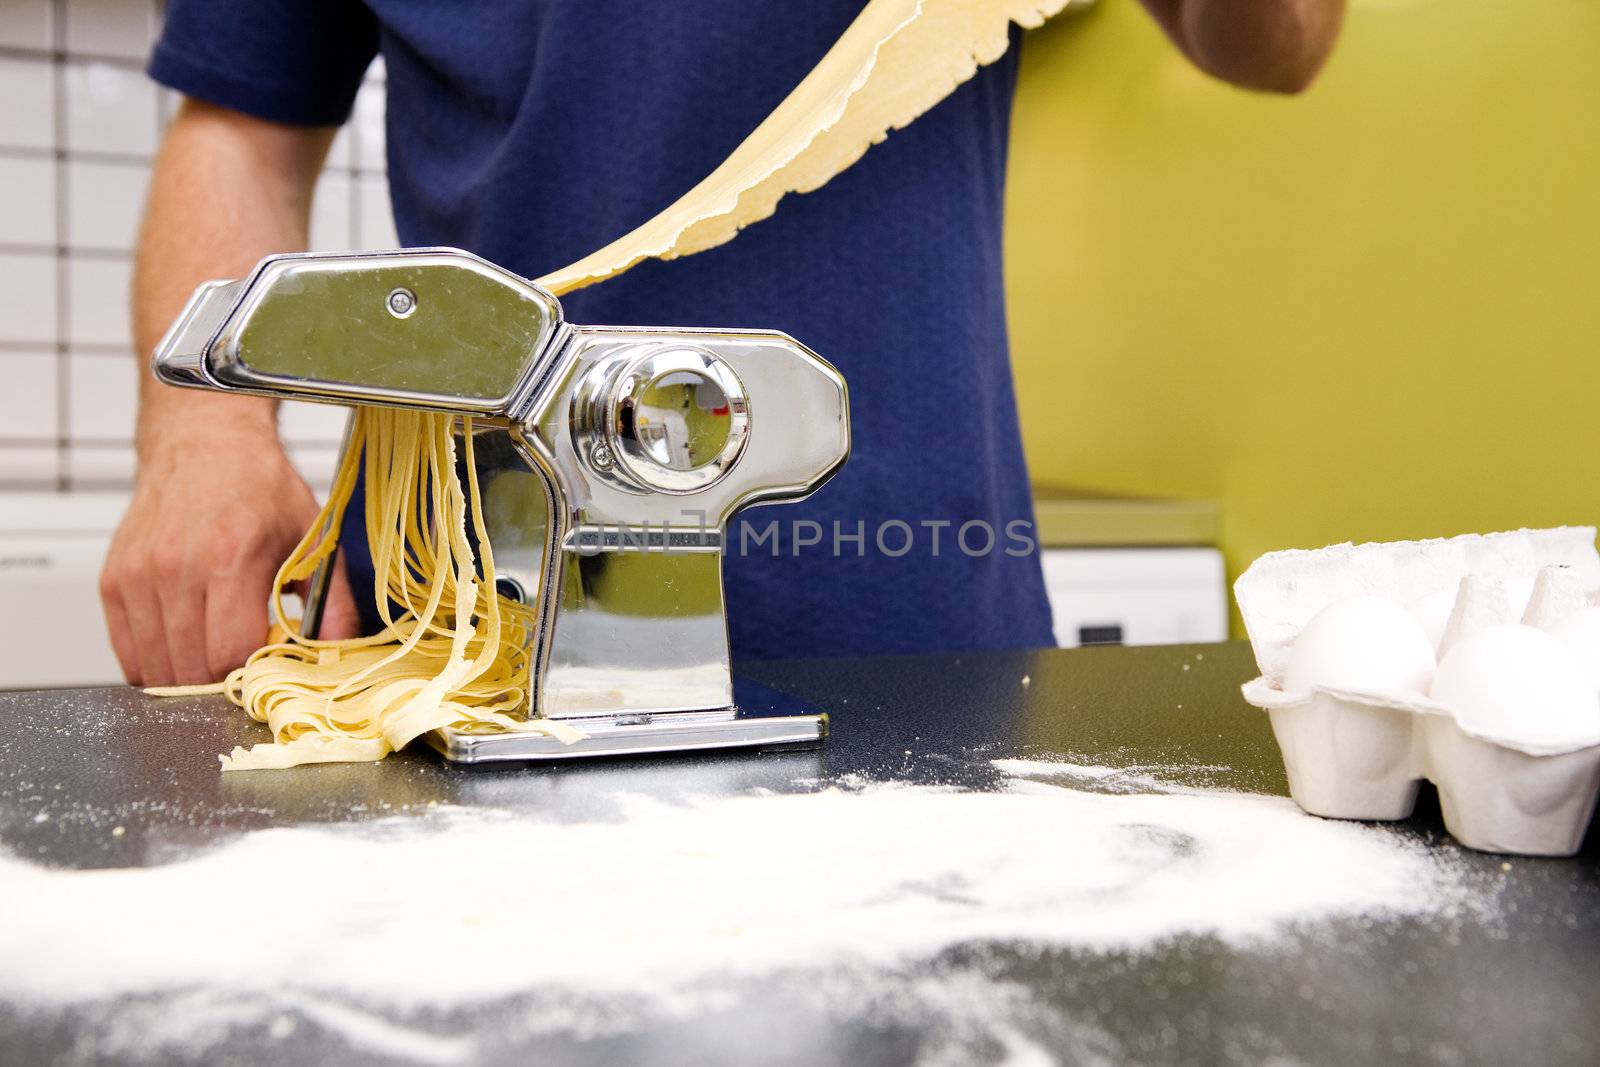 Fettuccine coming out of a manual pasta machine